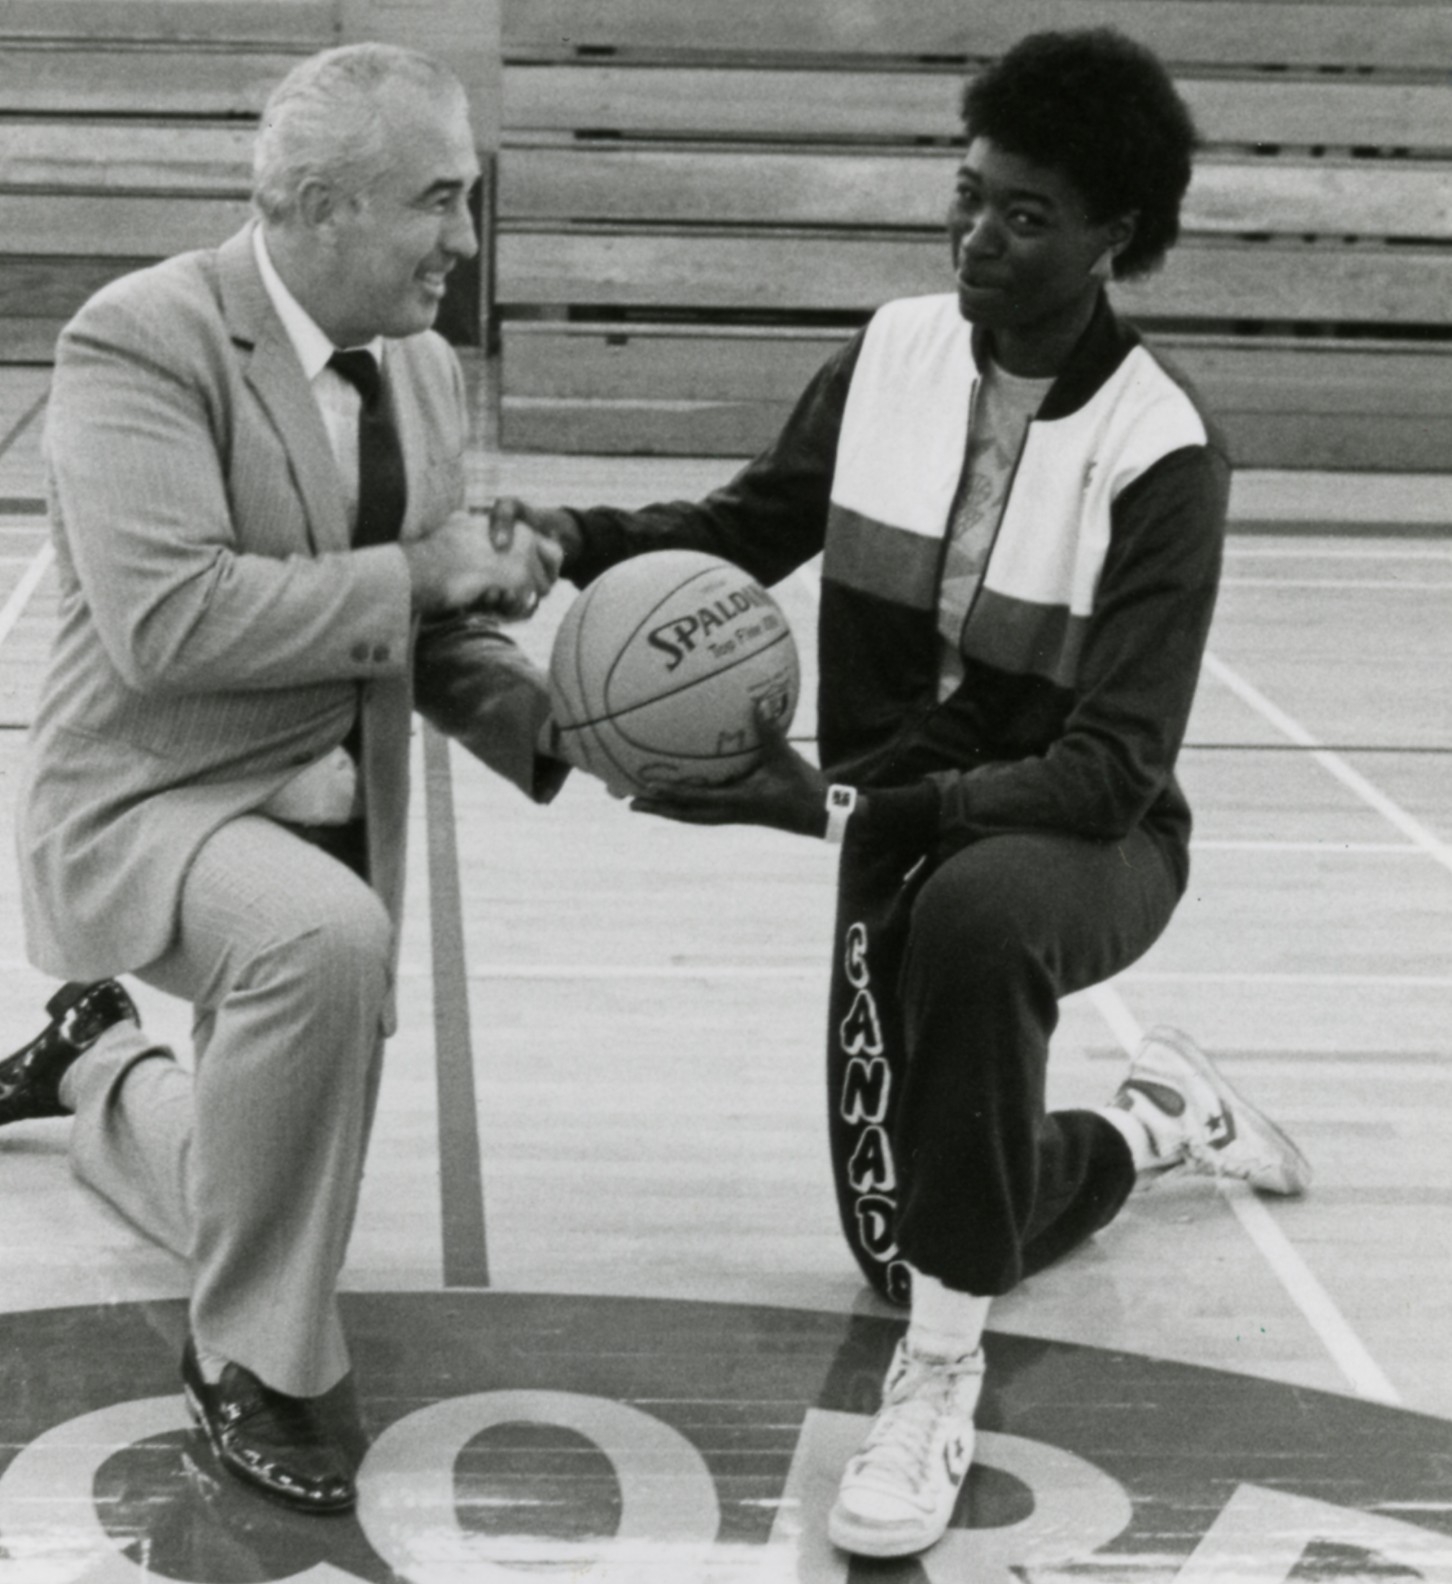 A older man and black student athlete posing for a photo. They're shaking hands and holding a basketball.